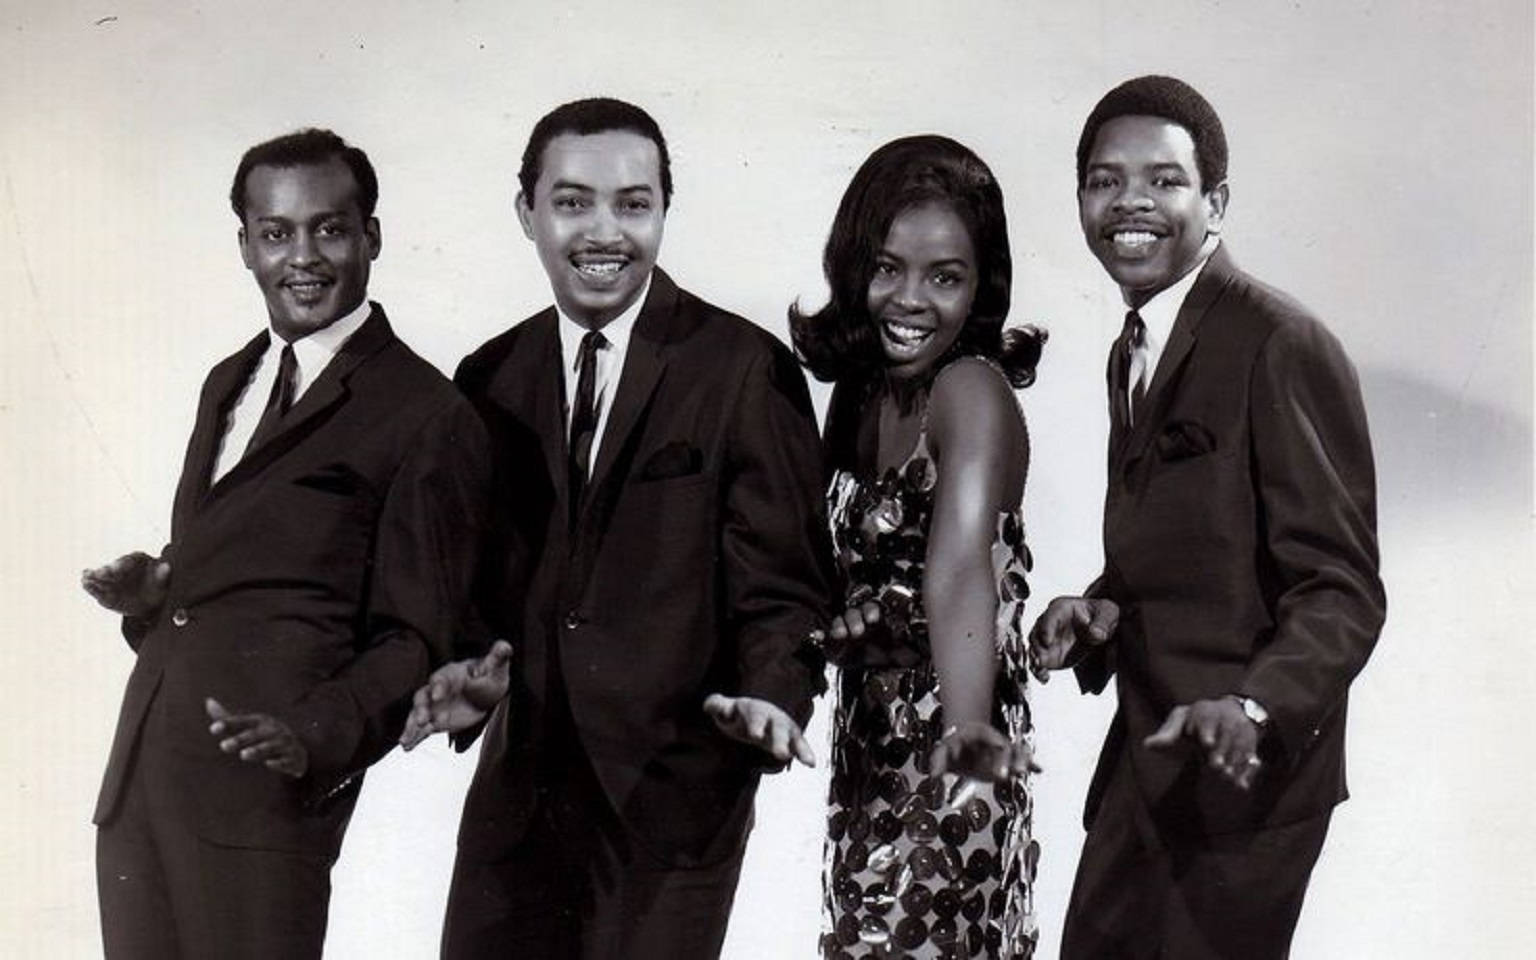 Gladys Knight And The Pips in their prime. Wallpaper